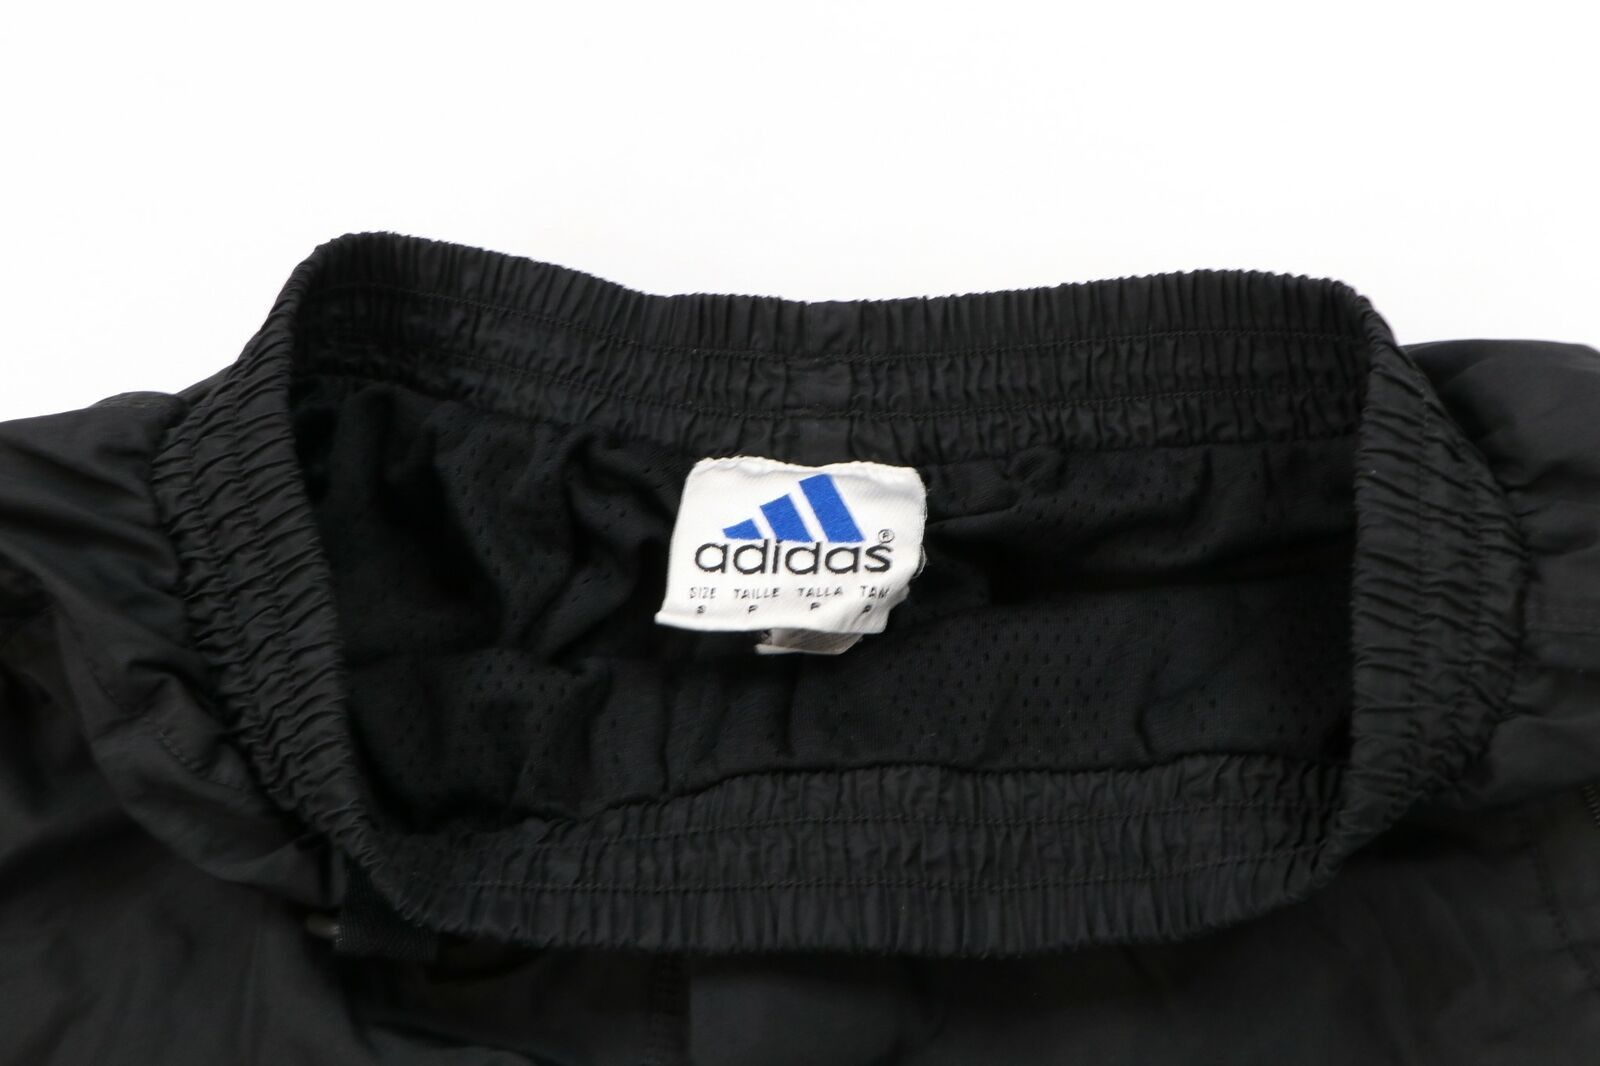 Adidas Vintage 90s Adidas Lined Spell Out Striped Zip Cuff Pants Size US 32 / EU 48 - 7 Thumbnail